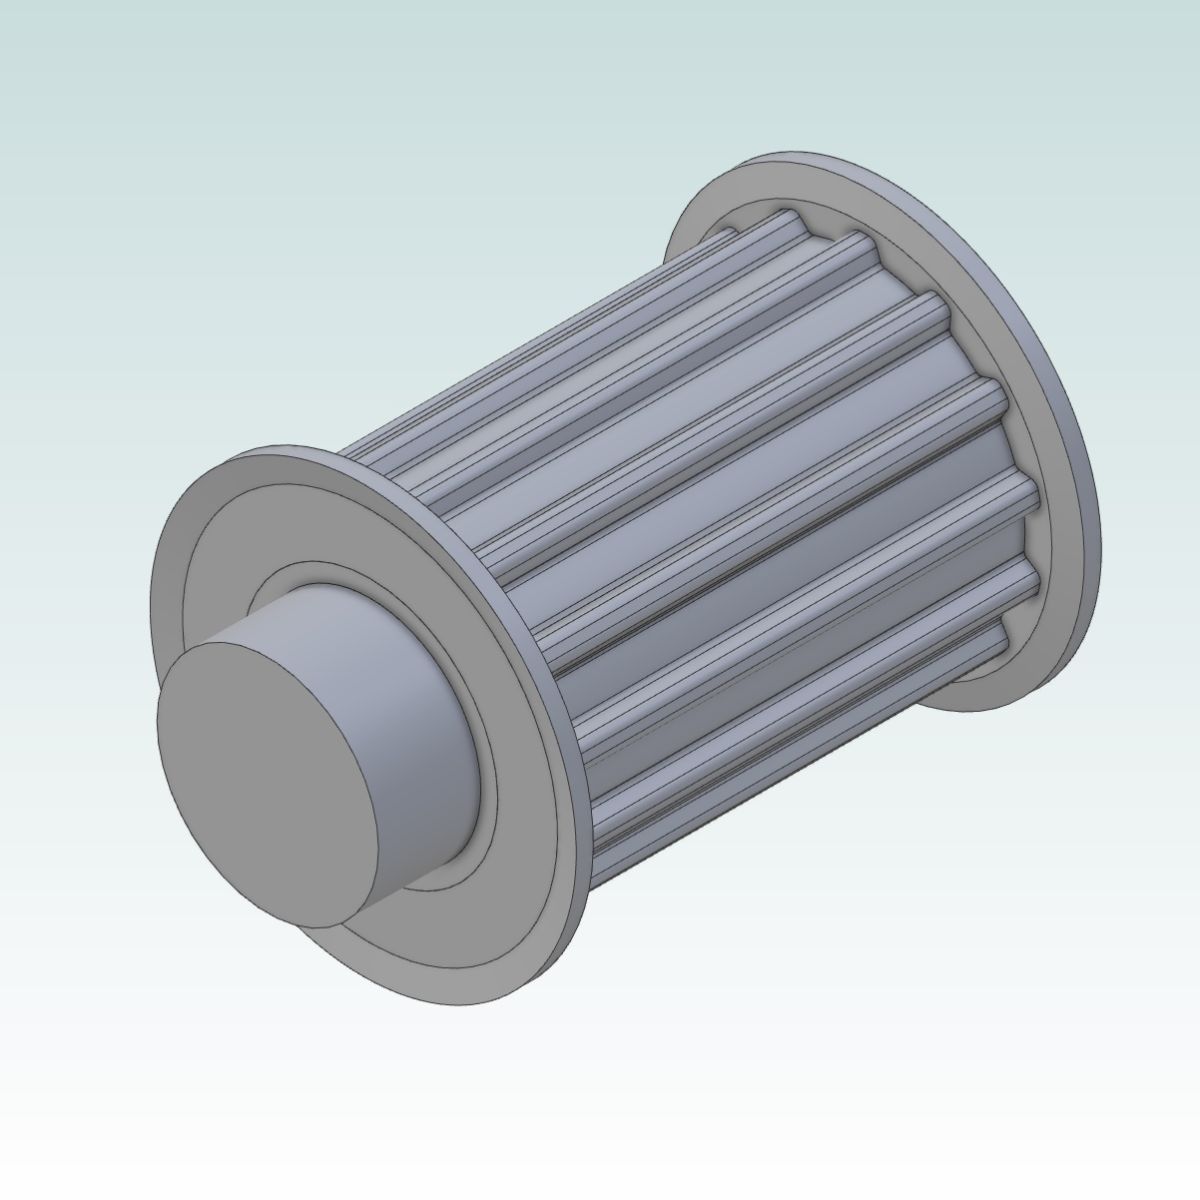 64081 at5 pulley 36at5 z14 for 25mm wide belts 3d render